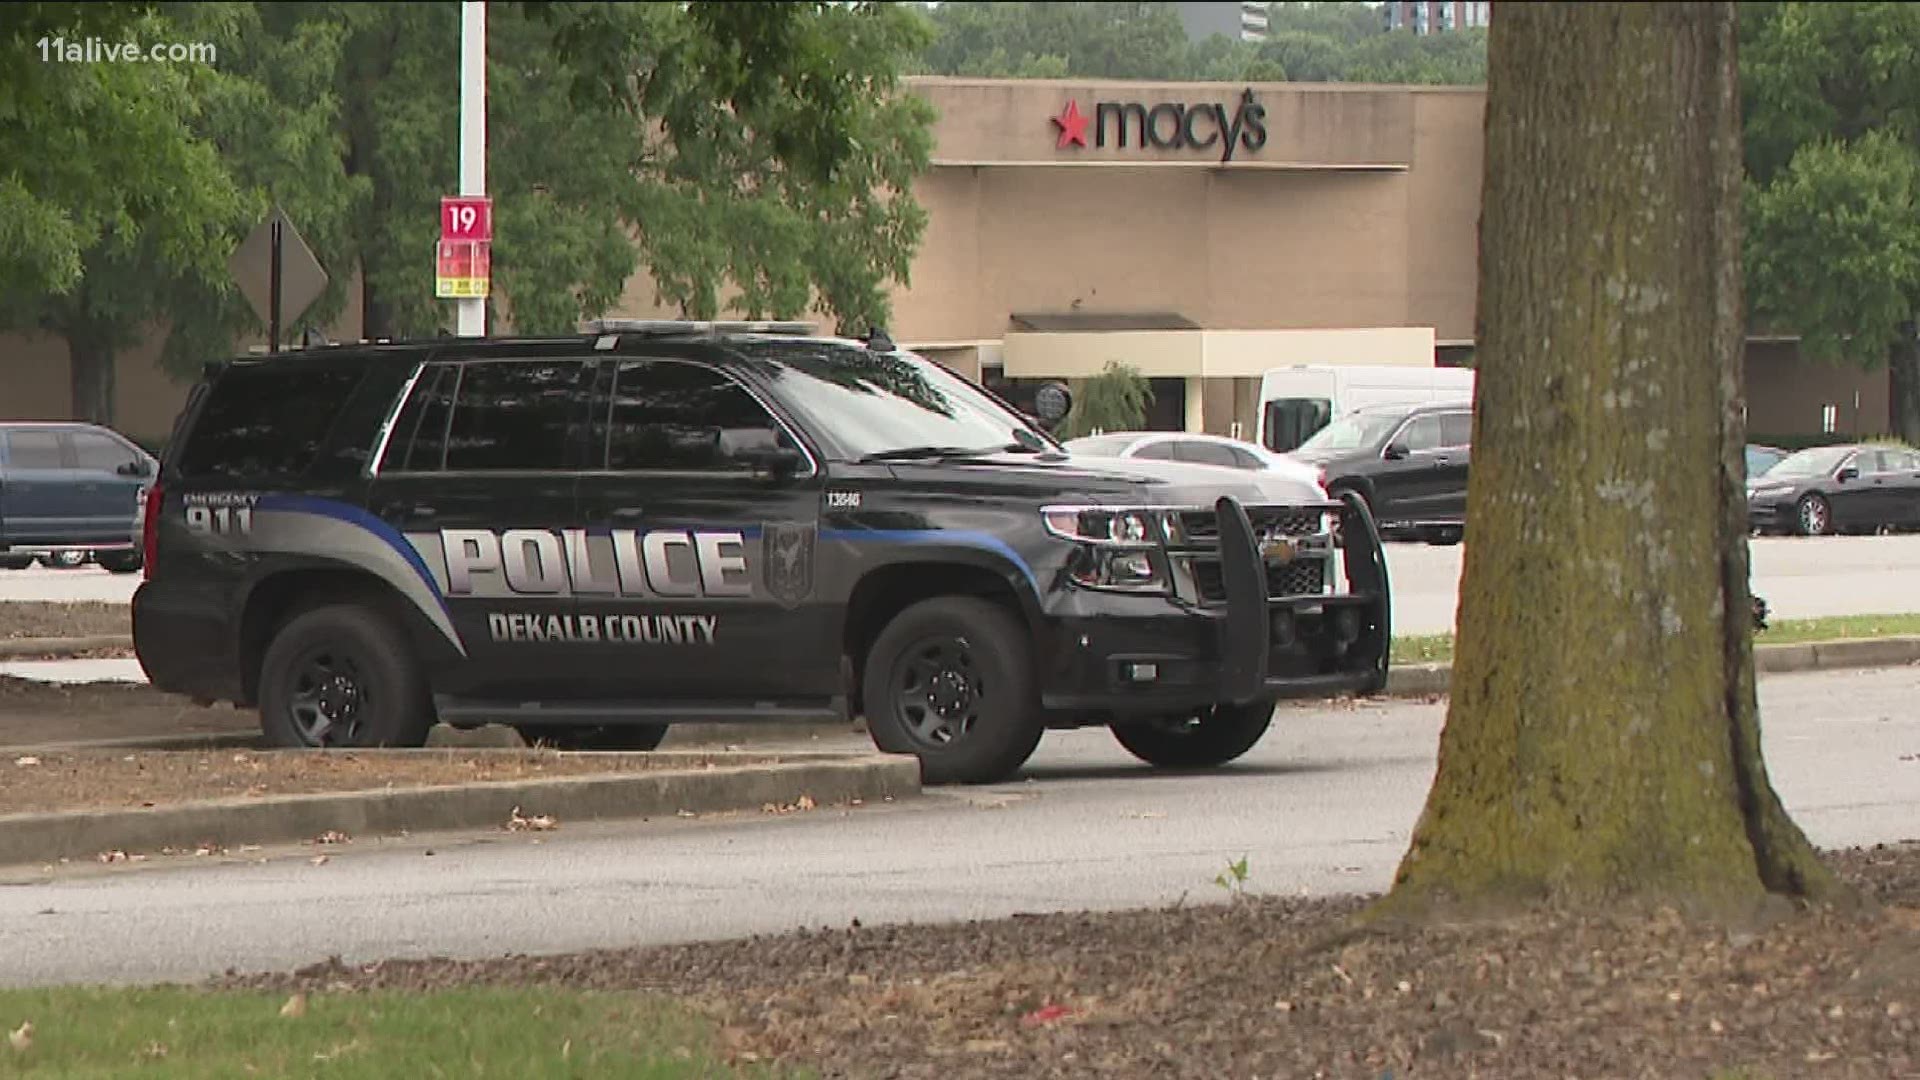 Dunwoody Police said the shoplifter ran out of Macy’s and opened fire in the parking lot when a private security officer followed him outside.